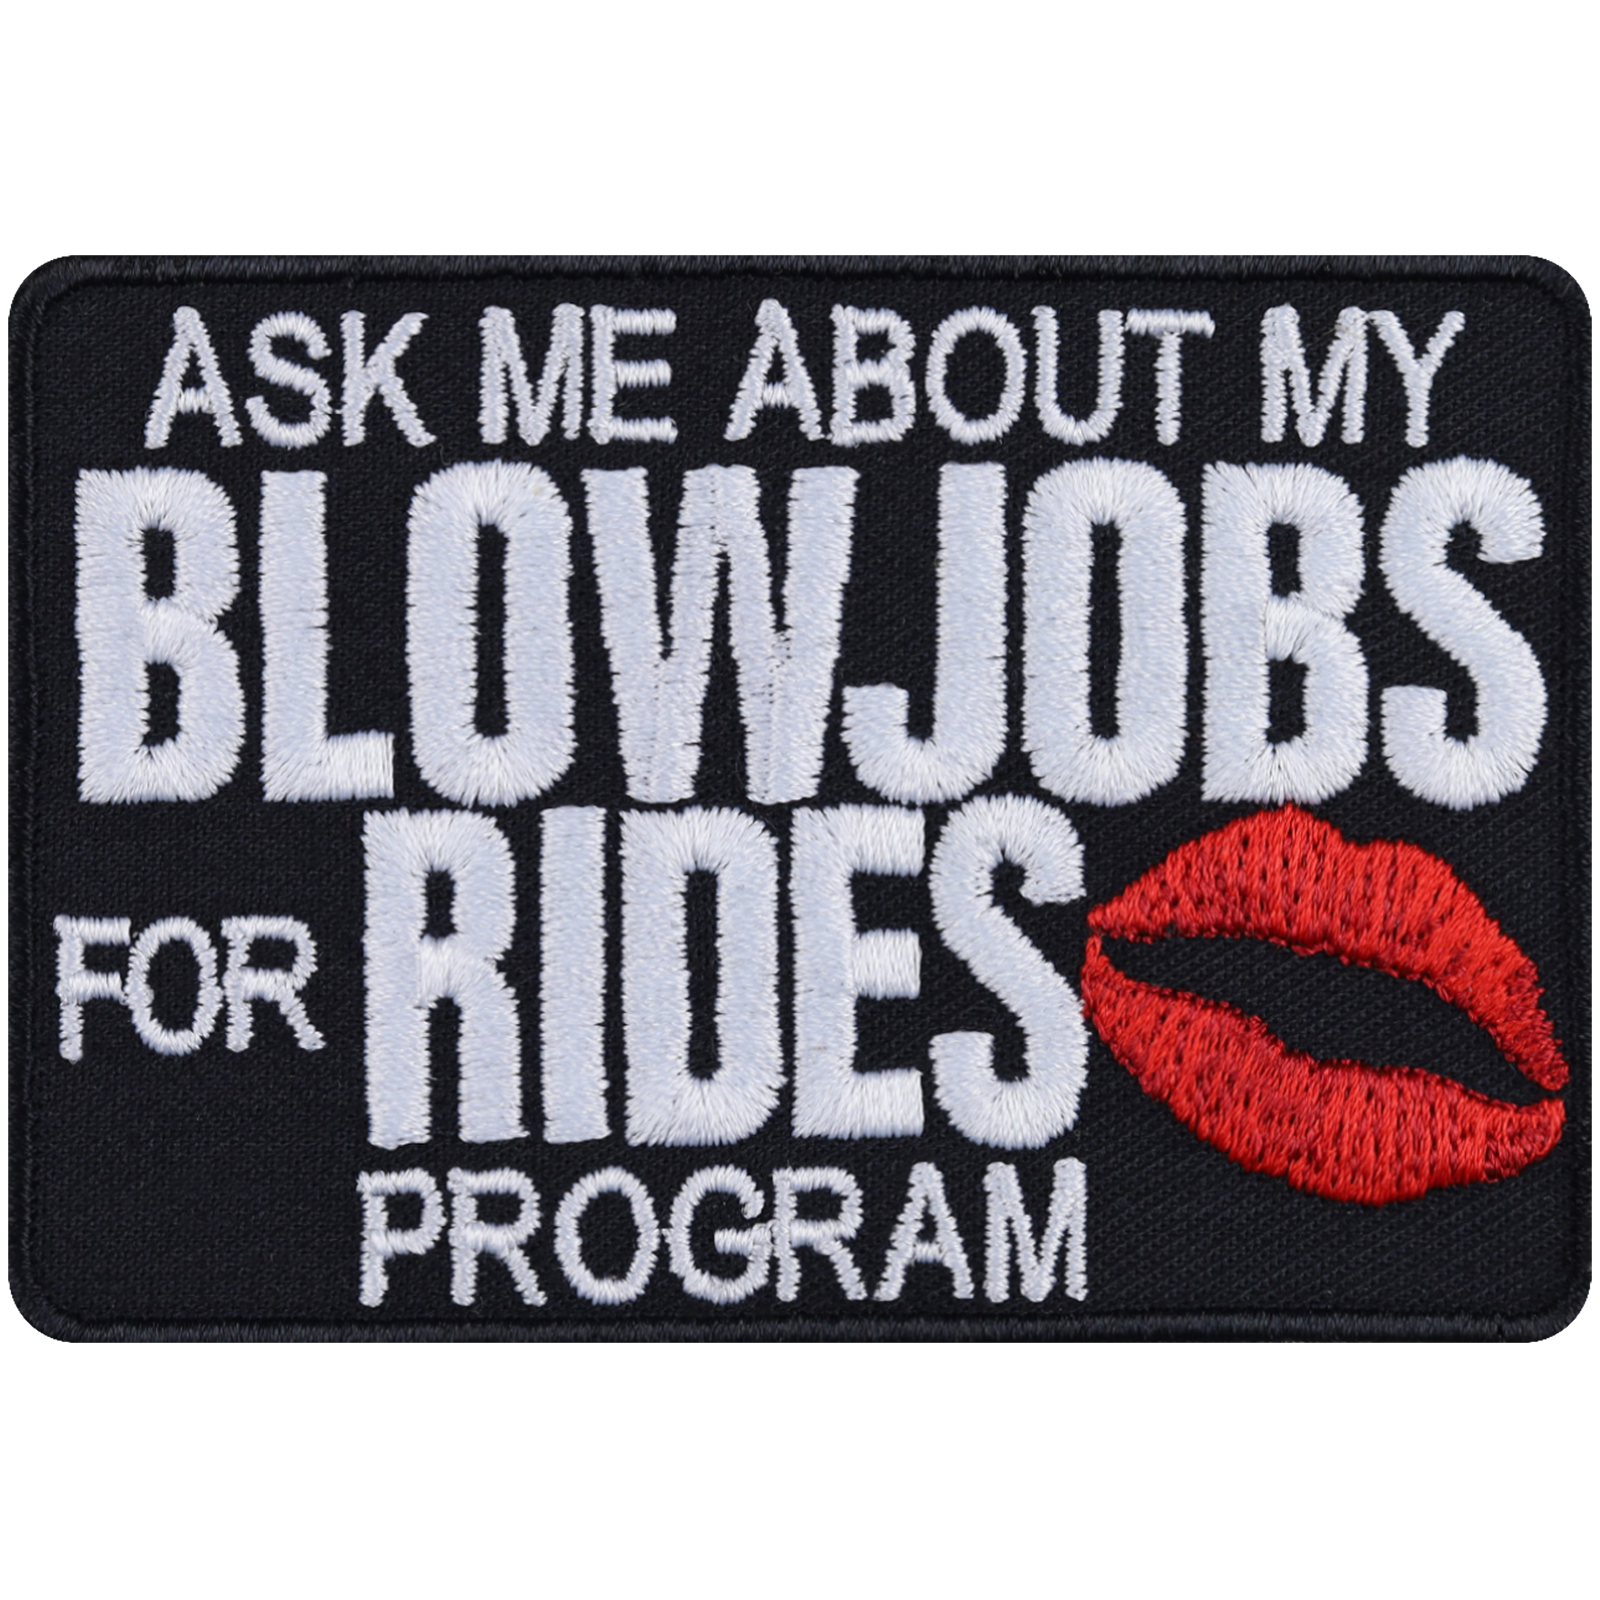 Ask me about my blowjobs for rides program - Patch